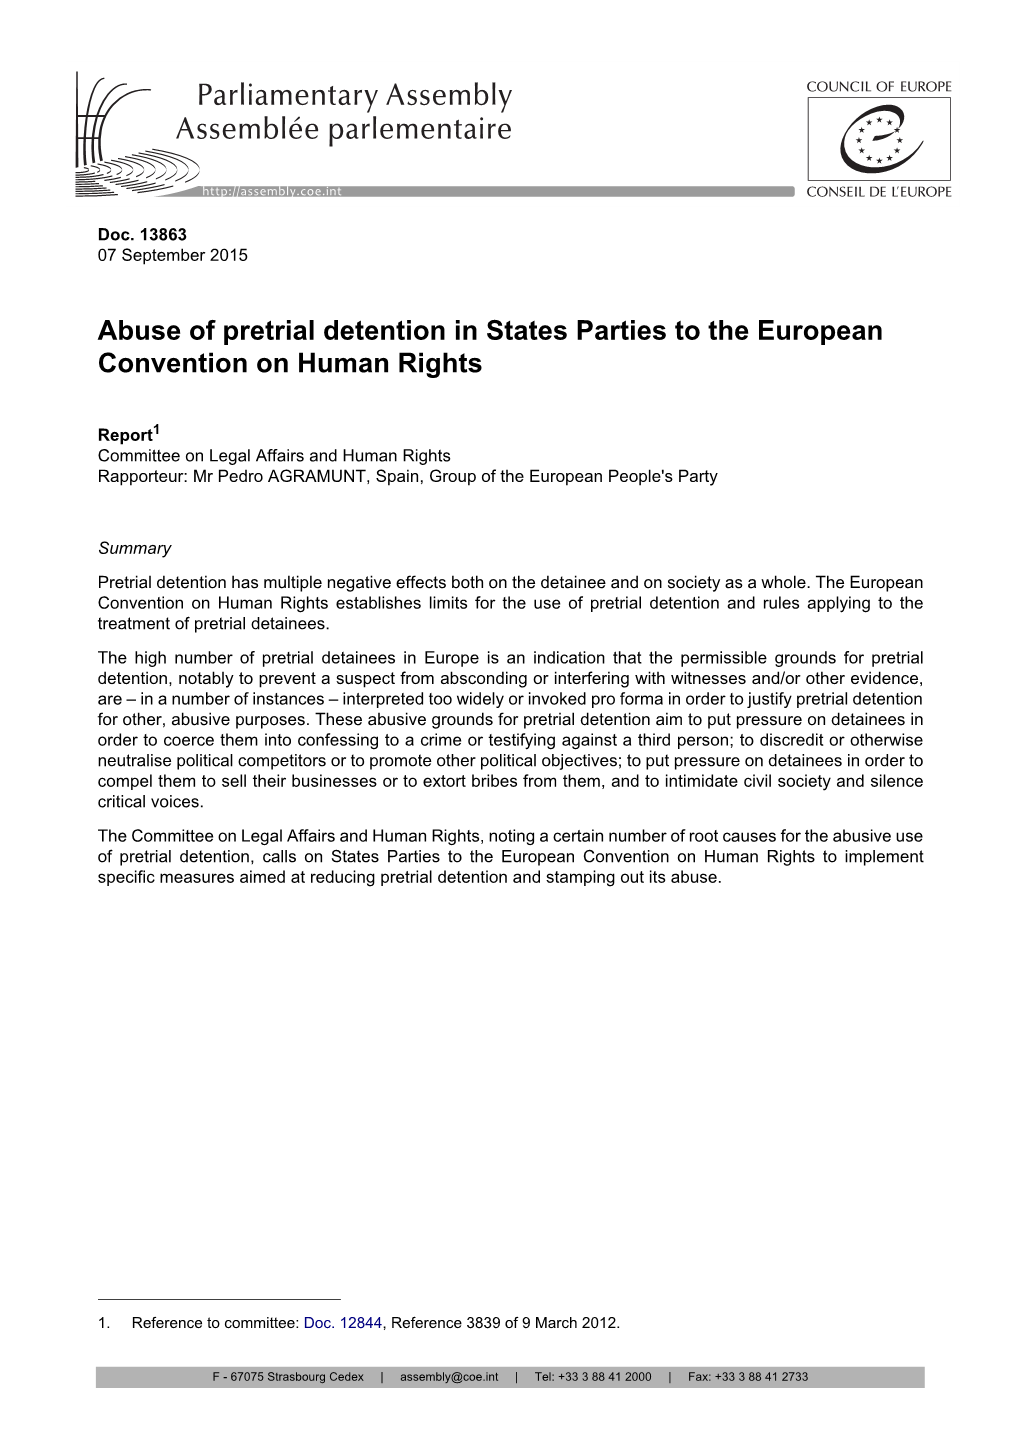 Abuse of Pretrial Detention in States Parties to the European Convention on Human Rights